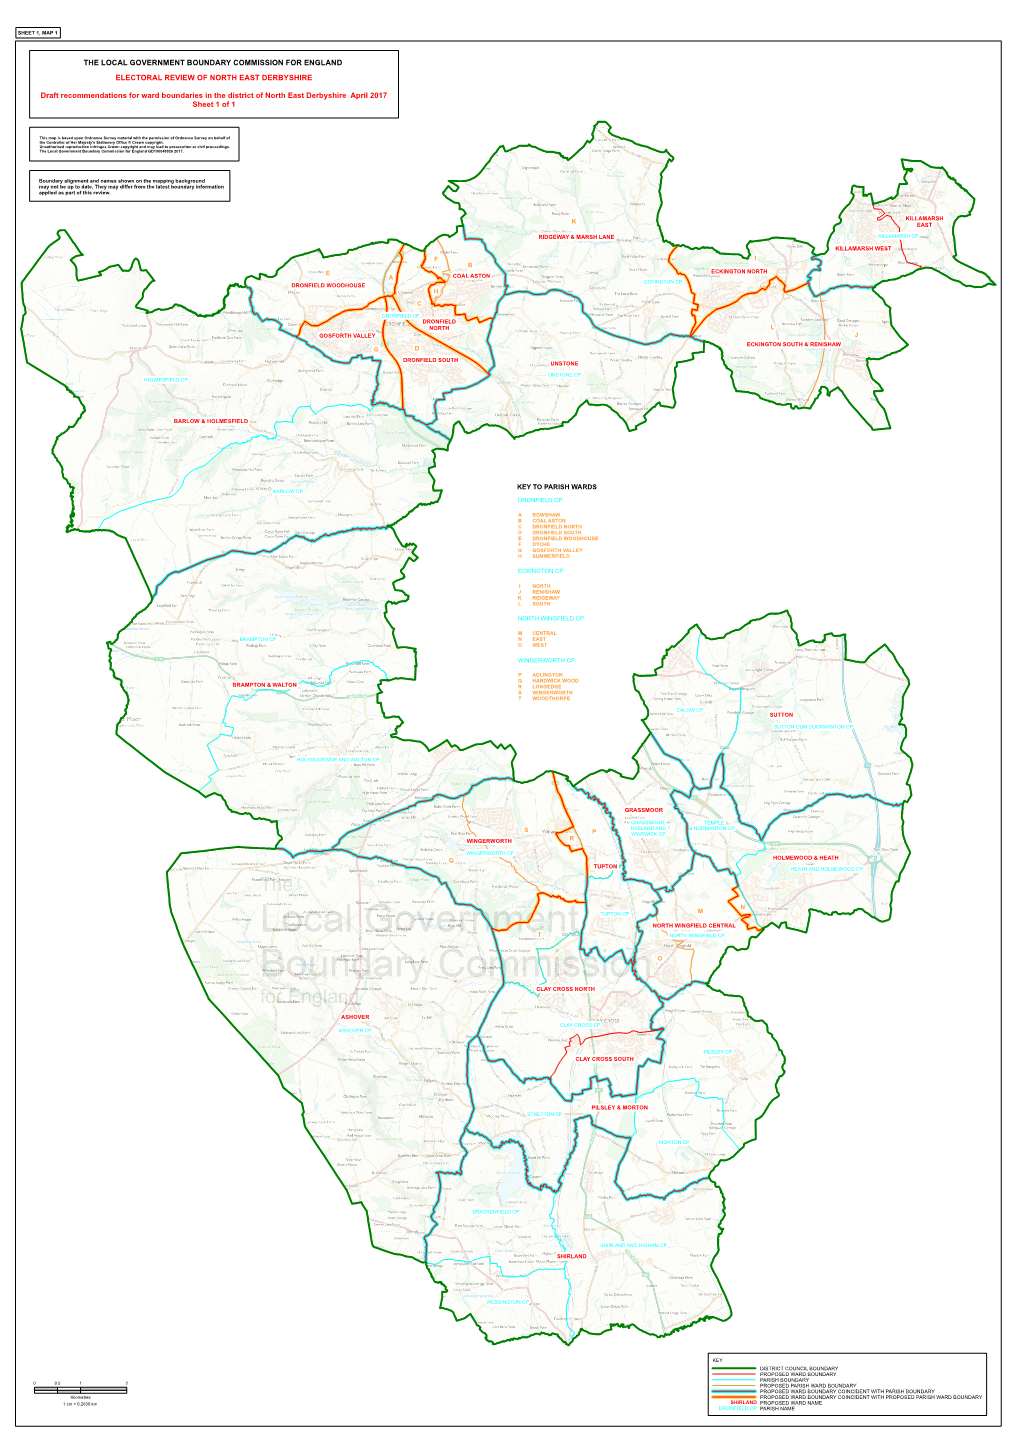 The Local Government Boundary Commission for England Electoral Review of North East Derbyshire